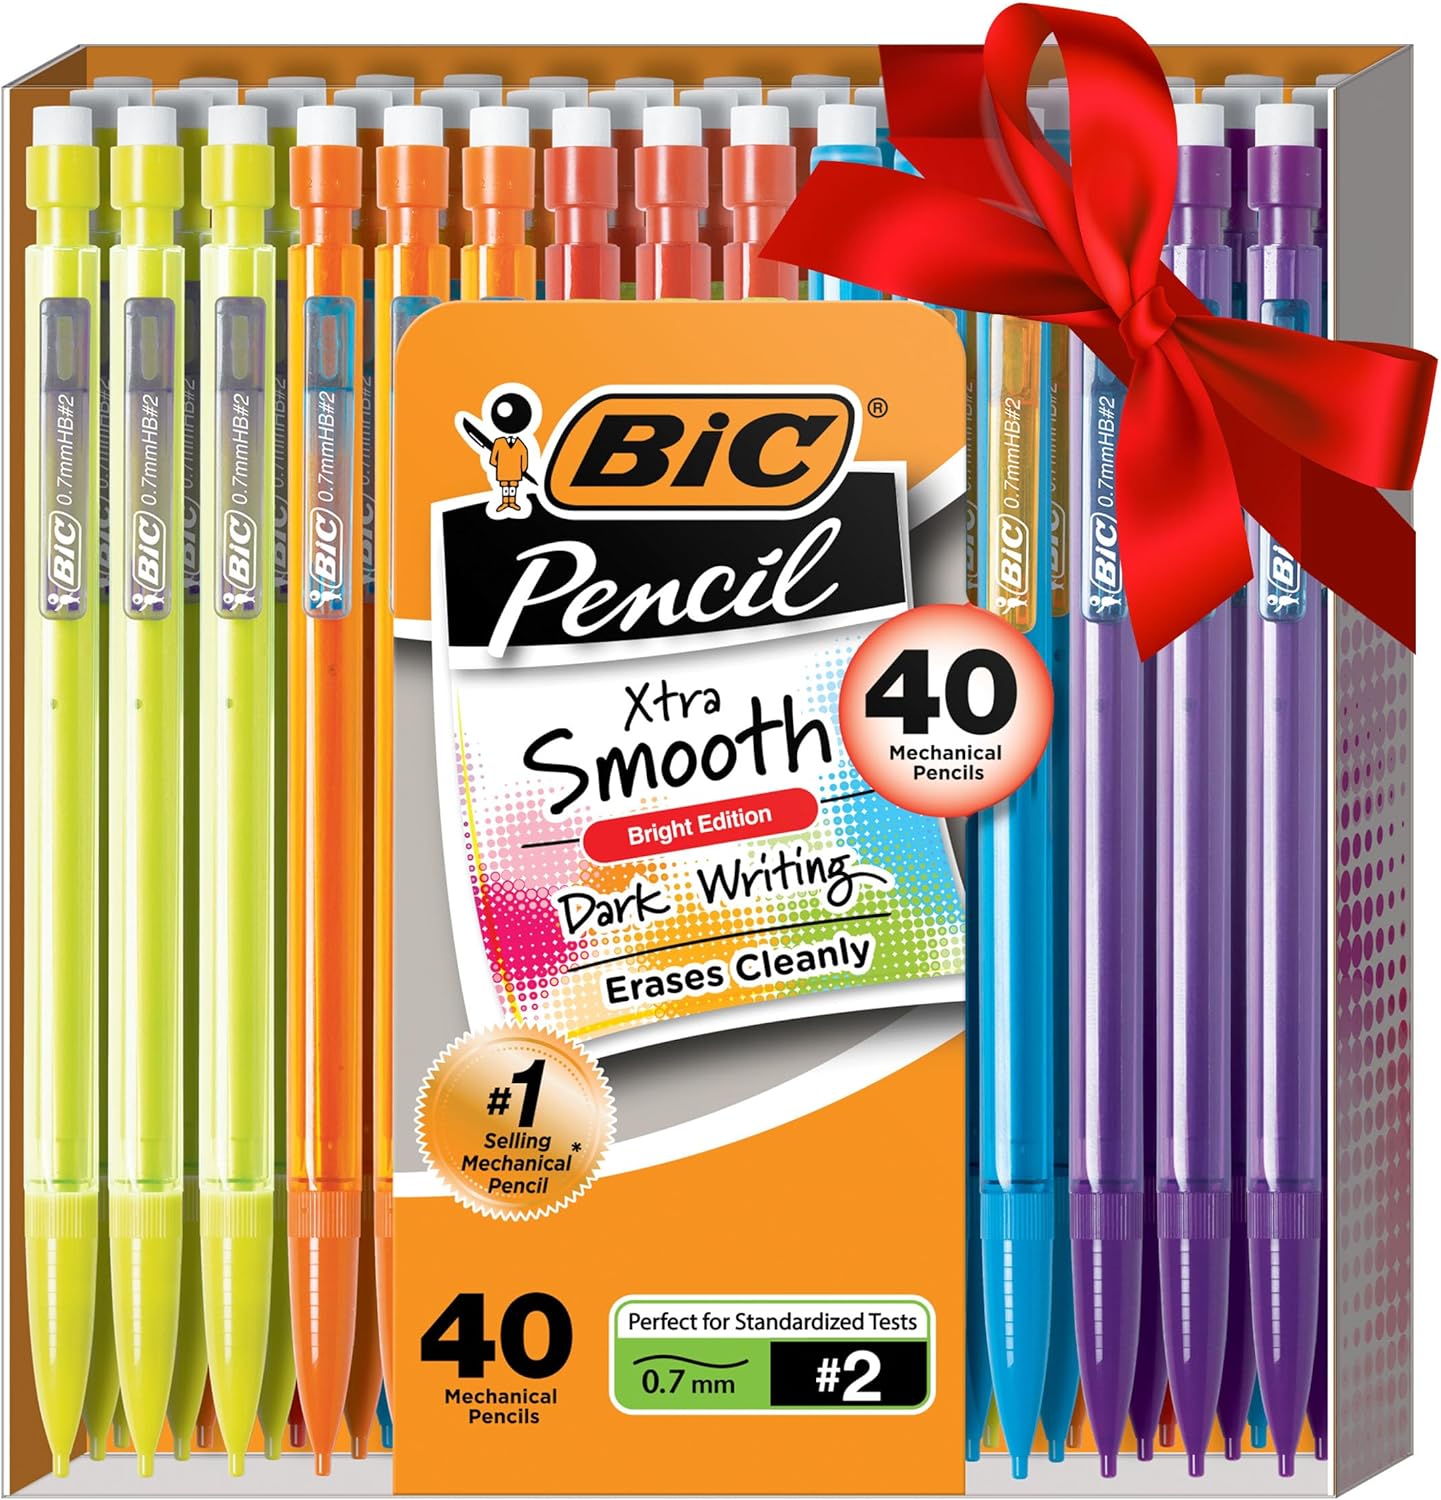 BIC Xtra-Smooth Mechanical Pencils with Erasers (MPCE40-BLK), Bright Edition Medium Point (0.7mm), 40-Count Pack, Bulk Mechanical Pencils for School or Office Supplies, Gifts for Students